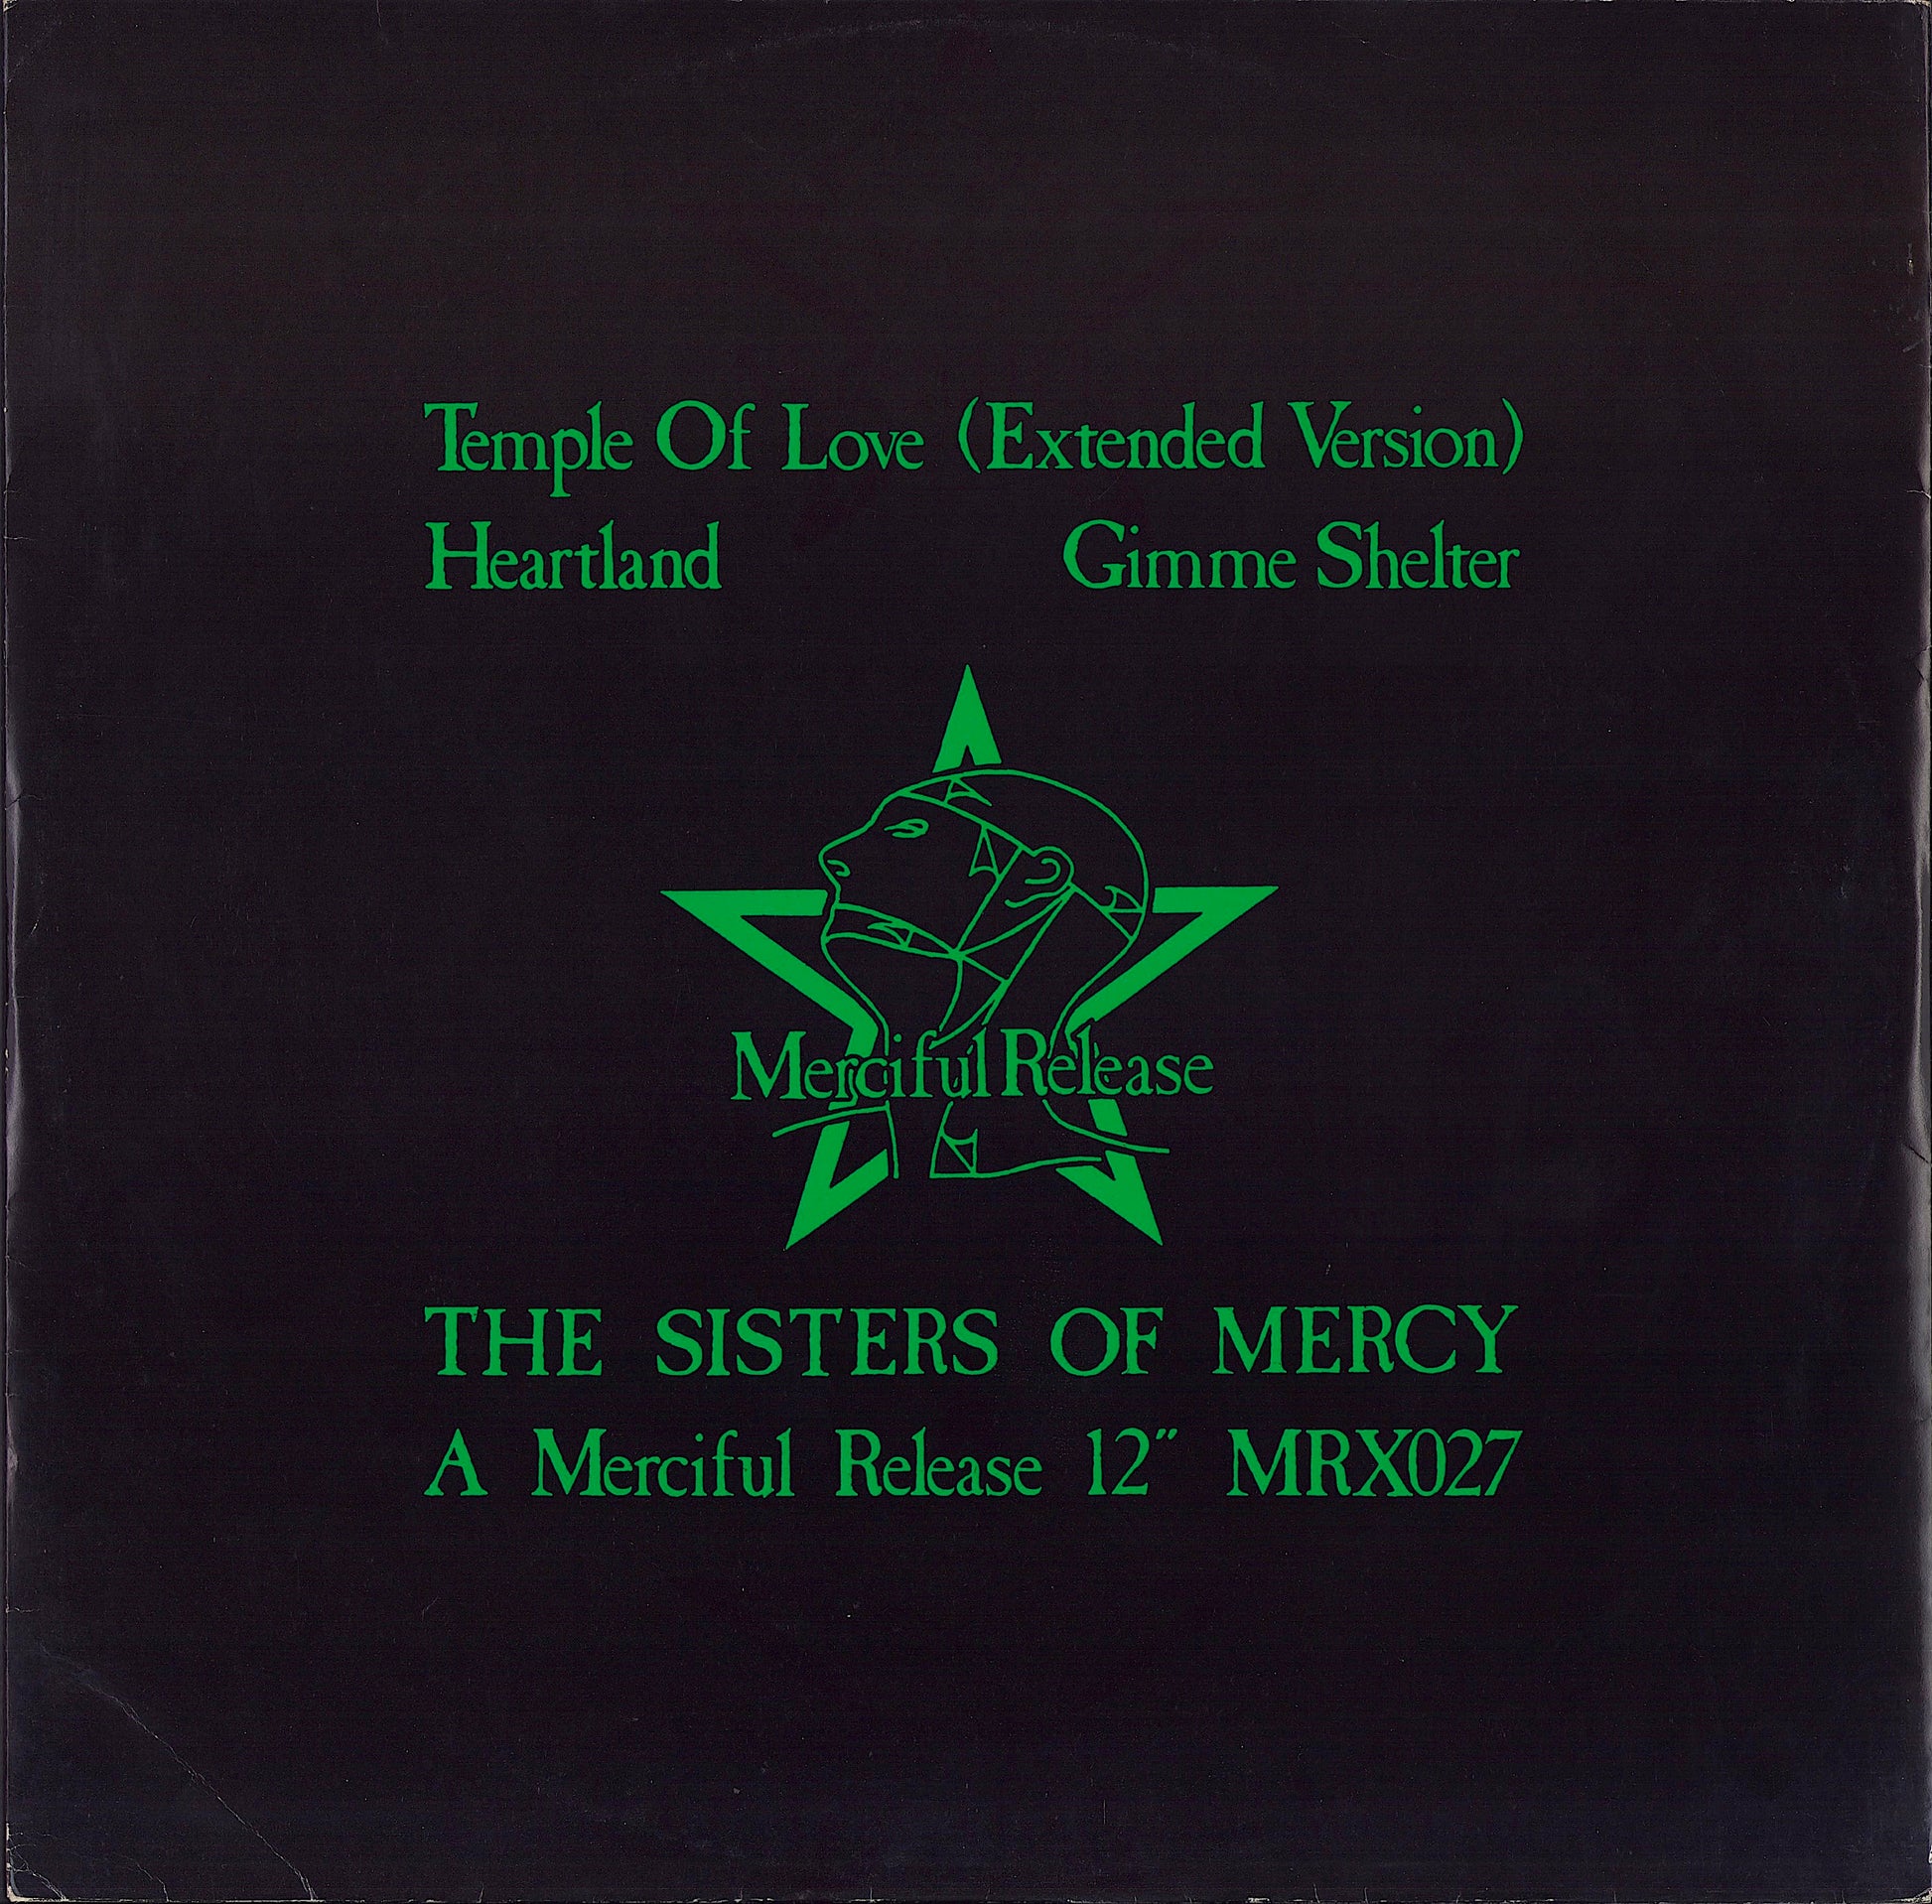 The Sisters Of Mercy - Temple Of Love Vinyl 12"